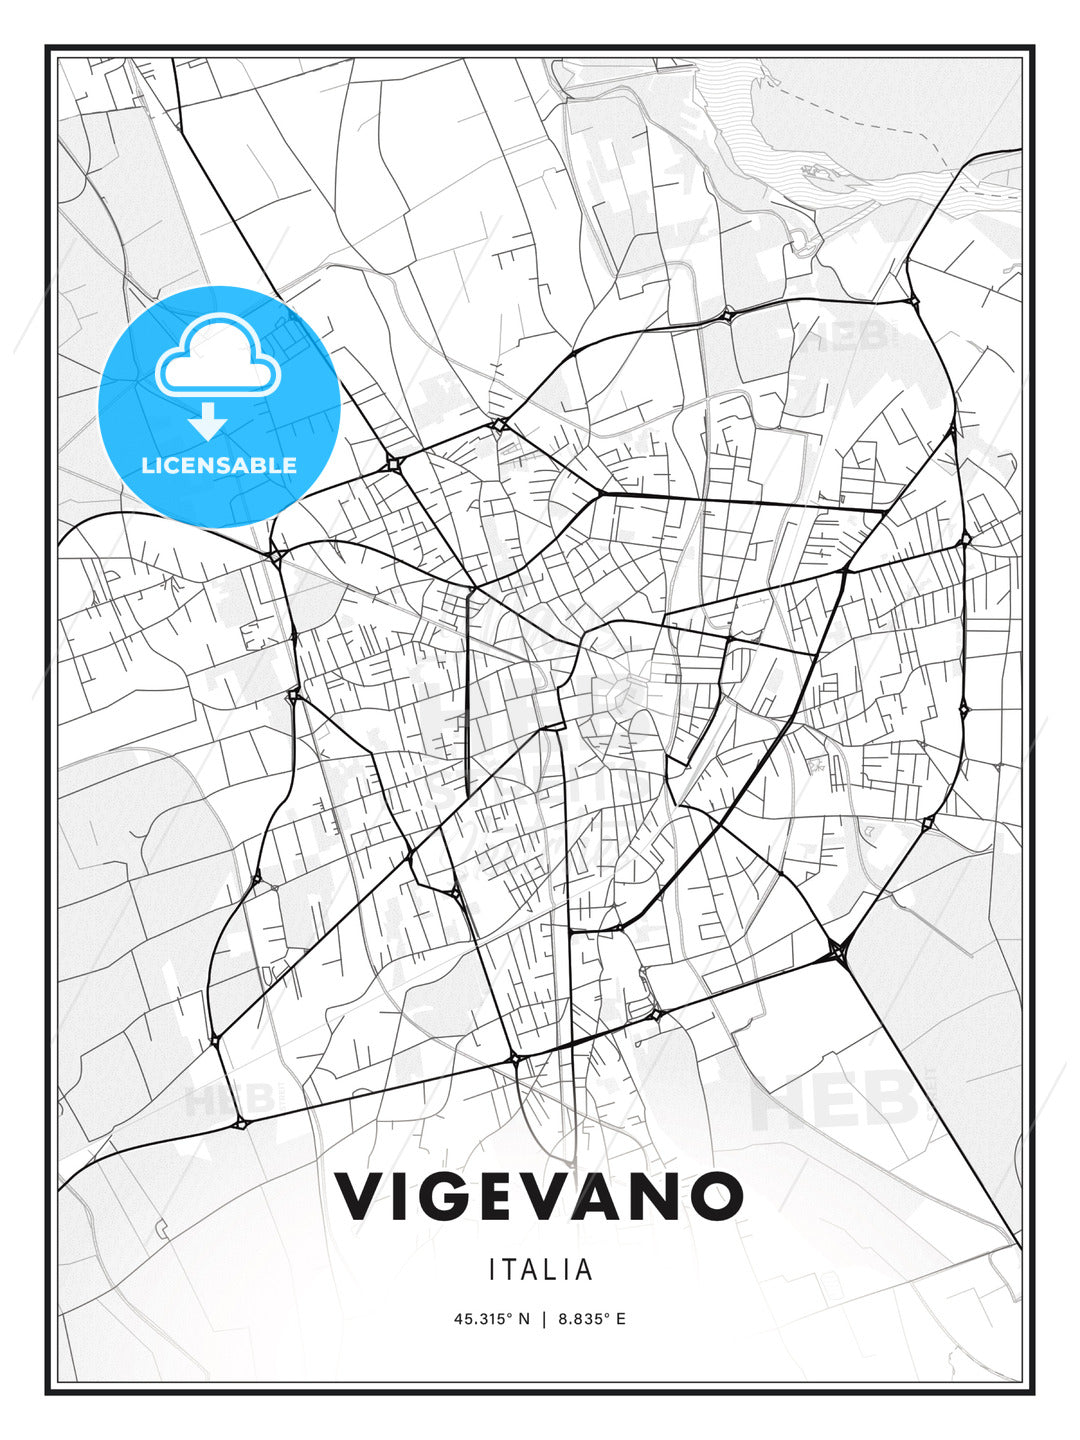 Vigevano, Italy, Modern Print Template in Various Formats - HEBSTREITS Sketches